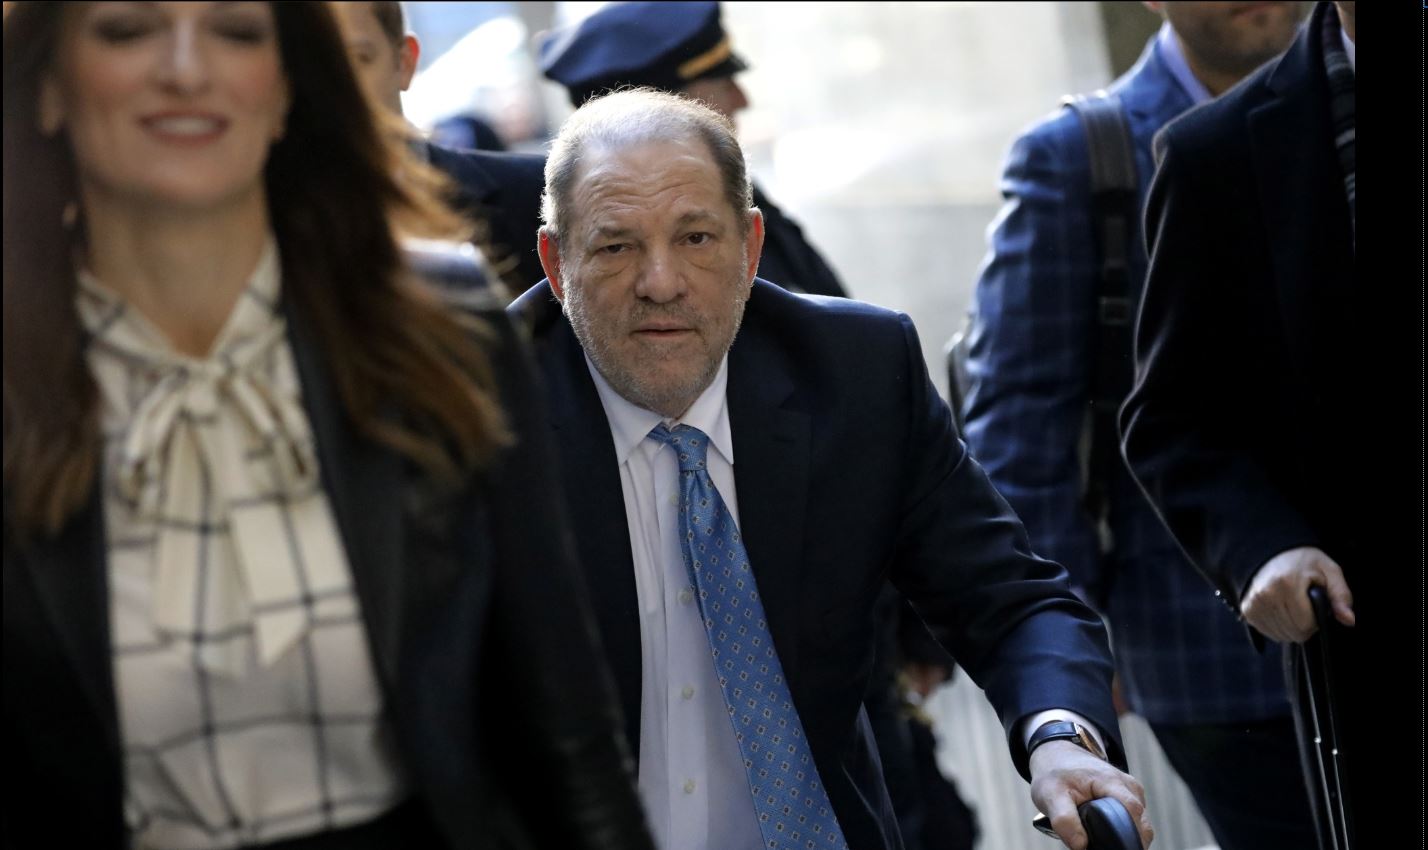 Harvey Weinstein arrives at state supreme court in New York on Feb. 24, 2020.  Photographer: Peter Foley/Bloomberg